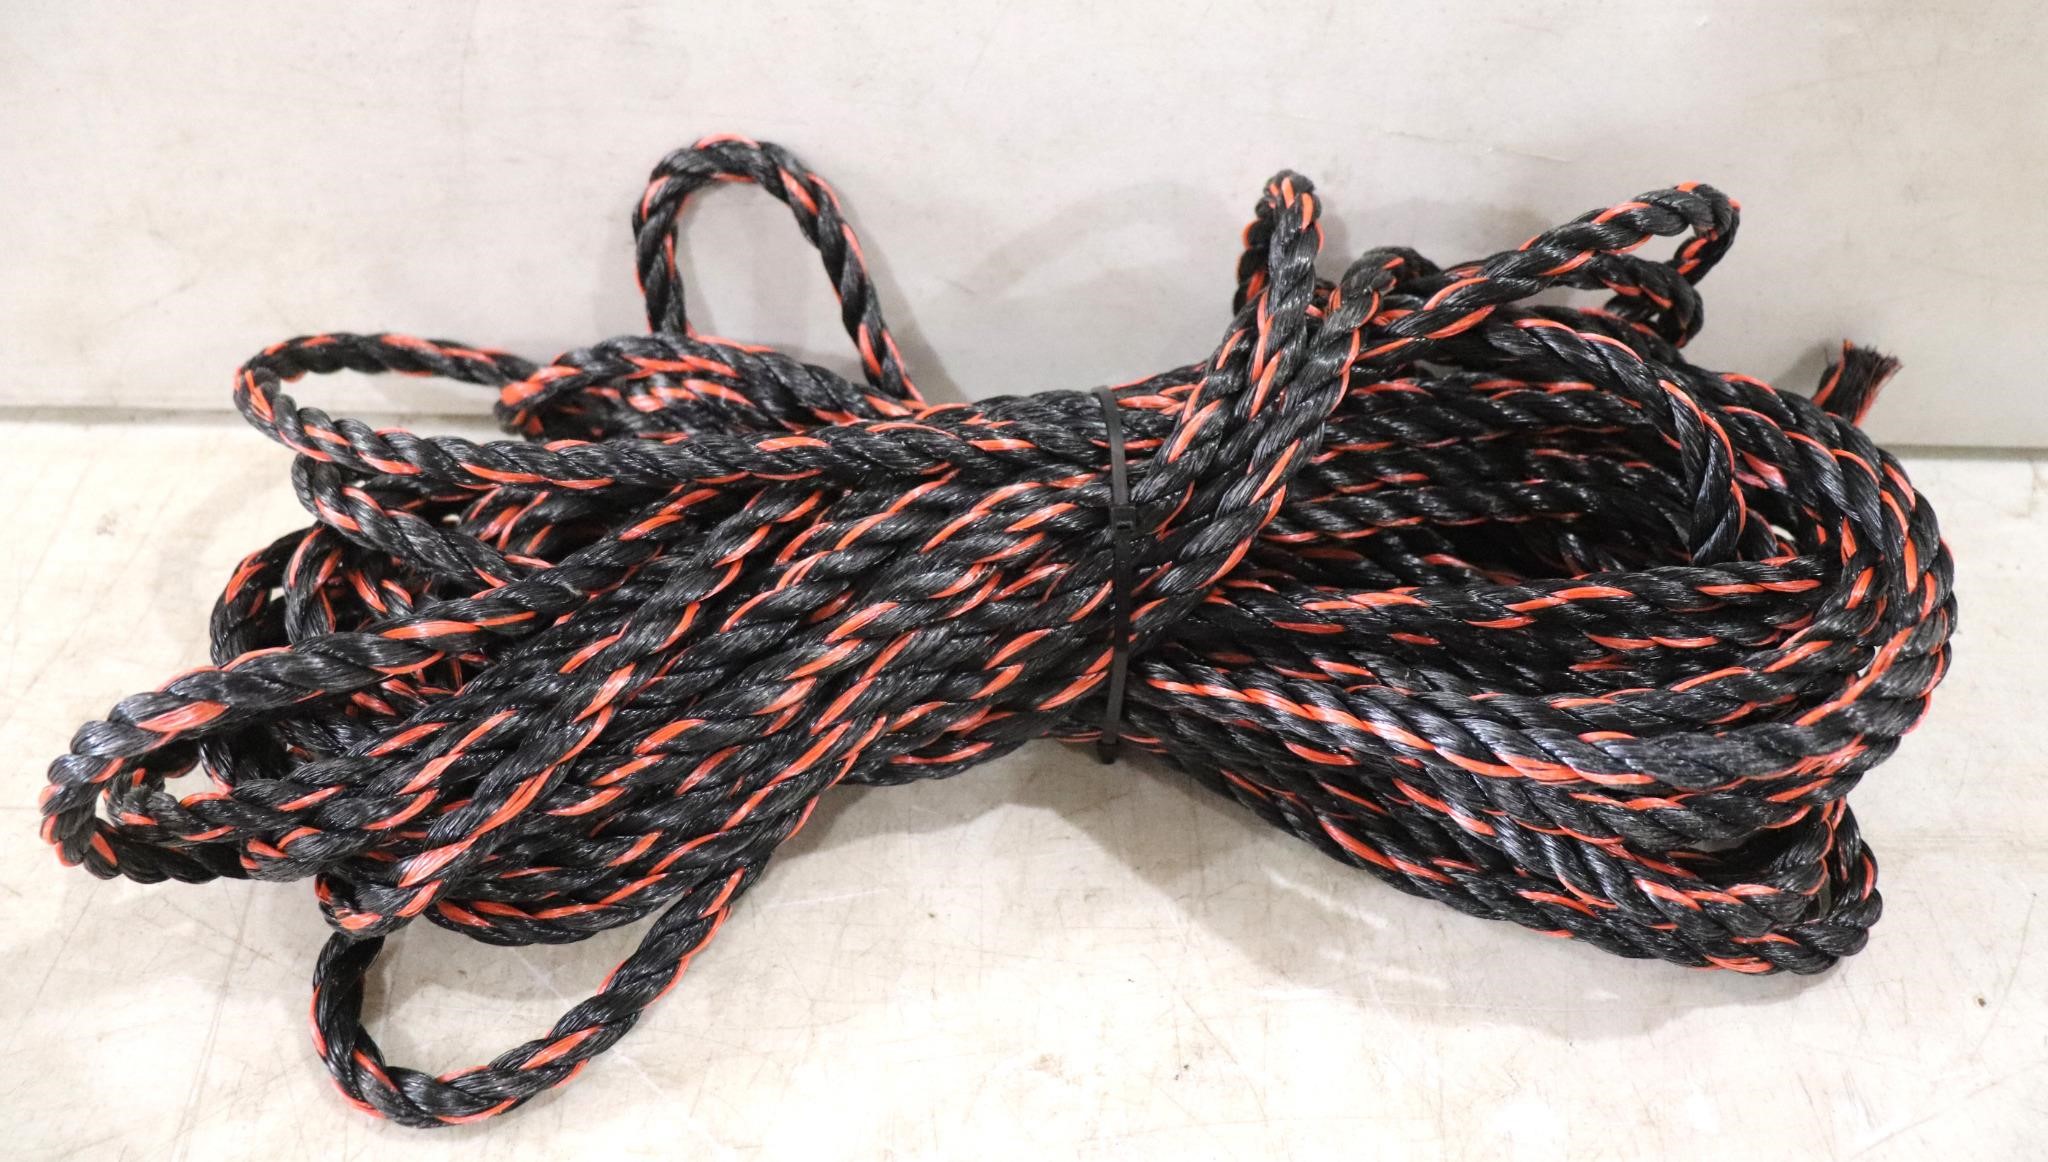 Approx. 70' of 1/2" Nylon Rope